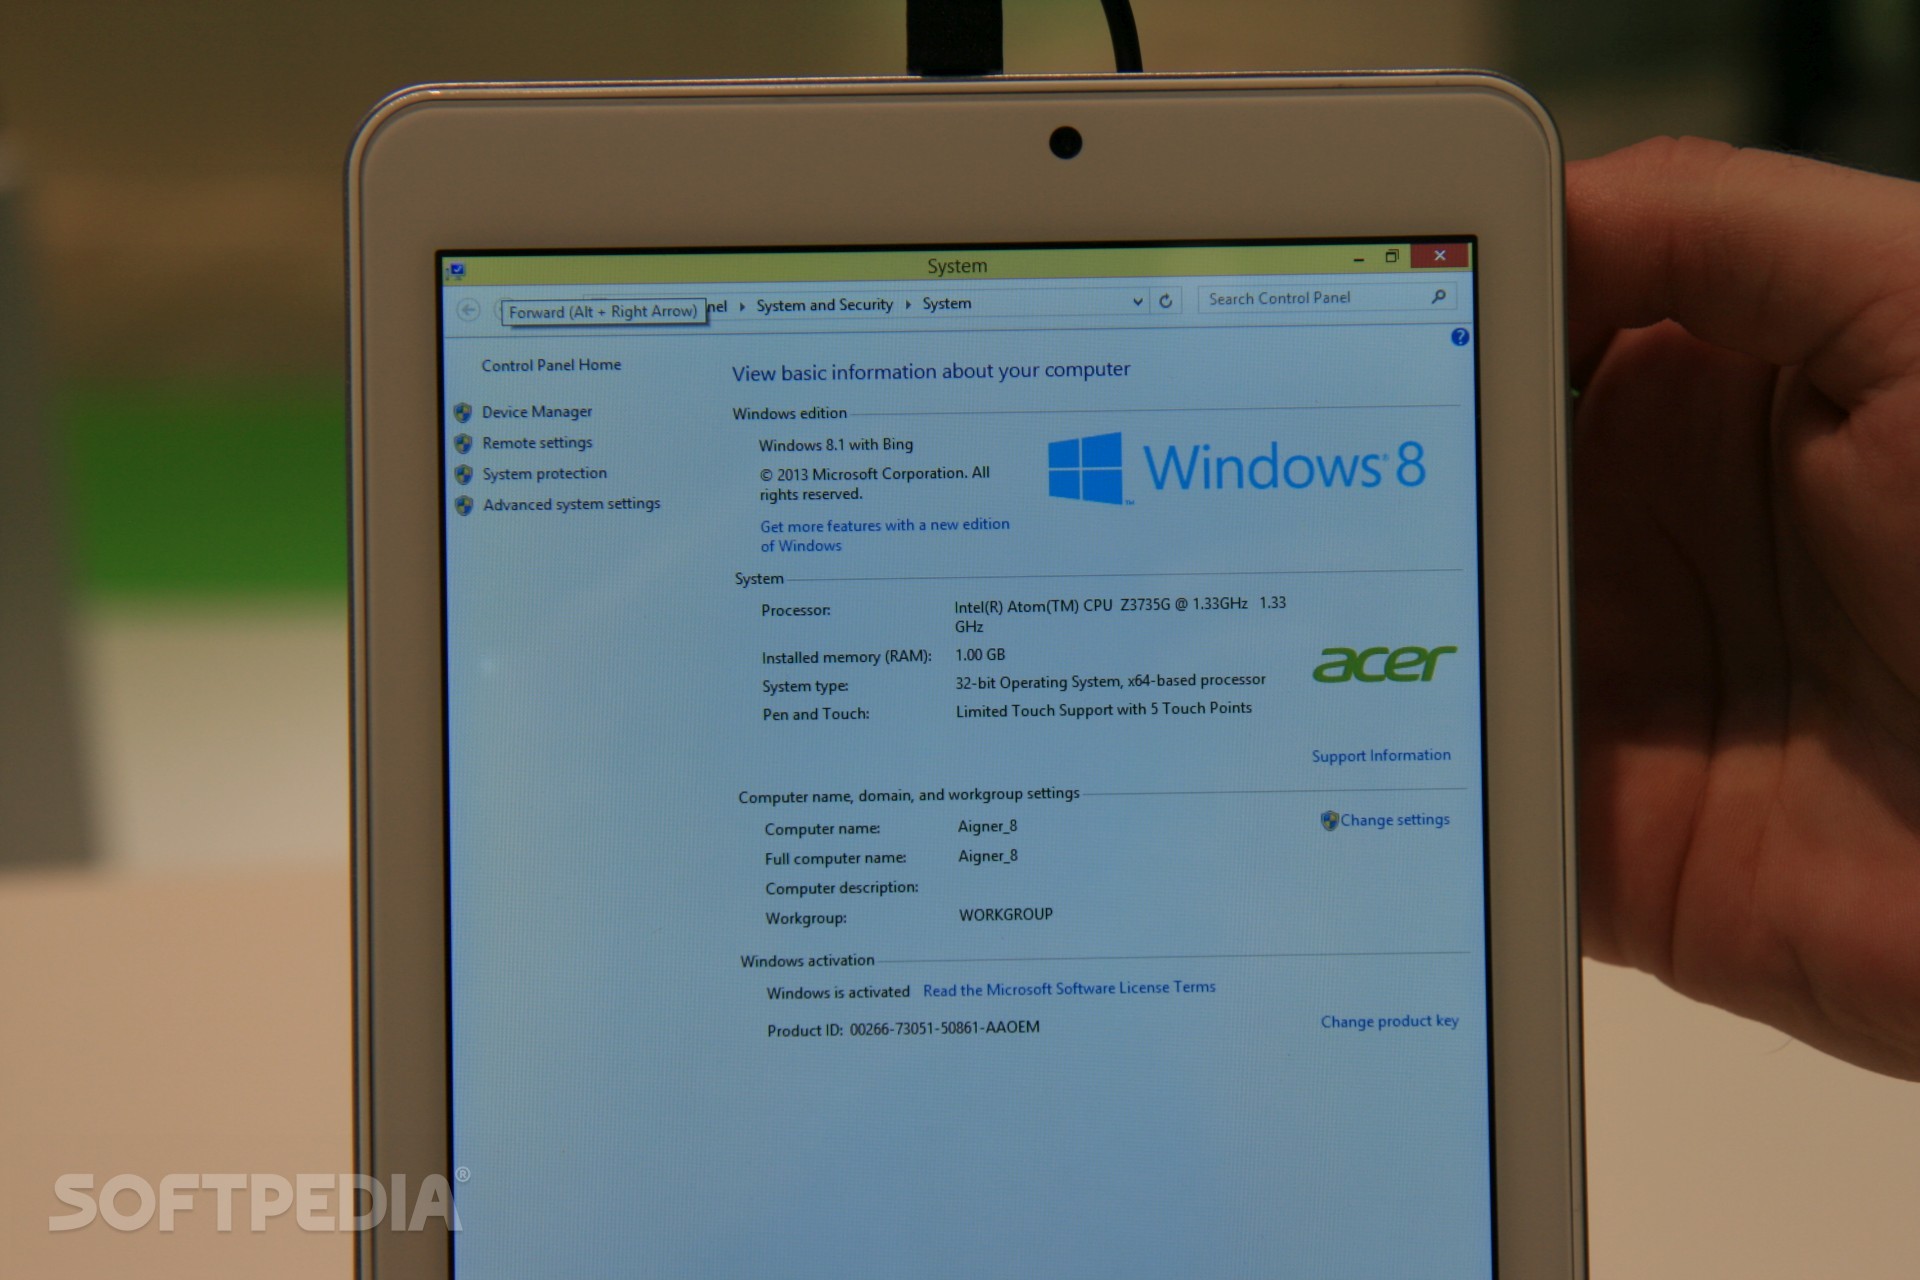 Hands On Acer Iconia Tab 8 W Tablet Brings Windows 8 1 With Bing Goodness For 150 114